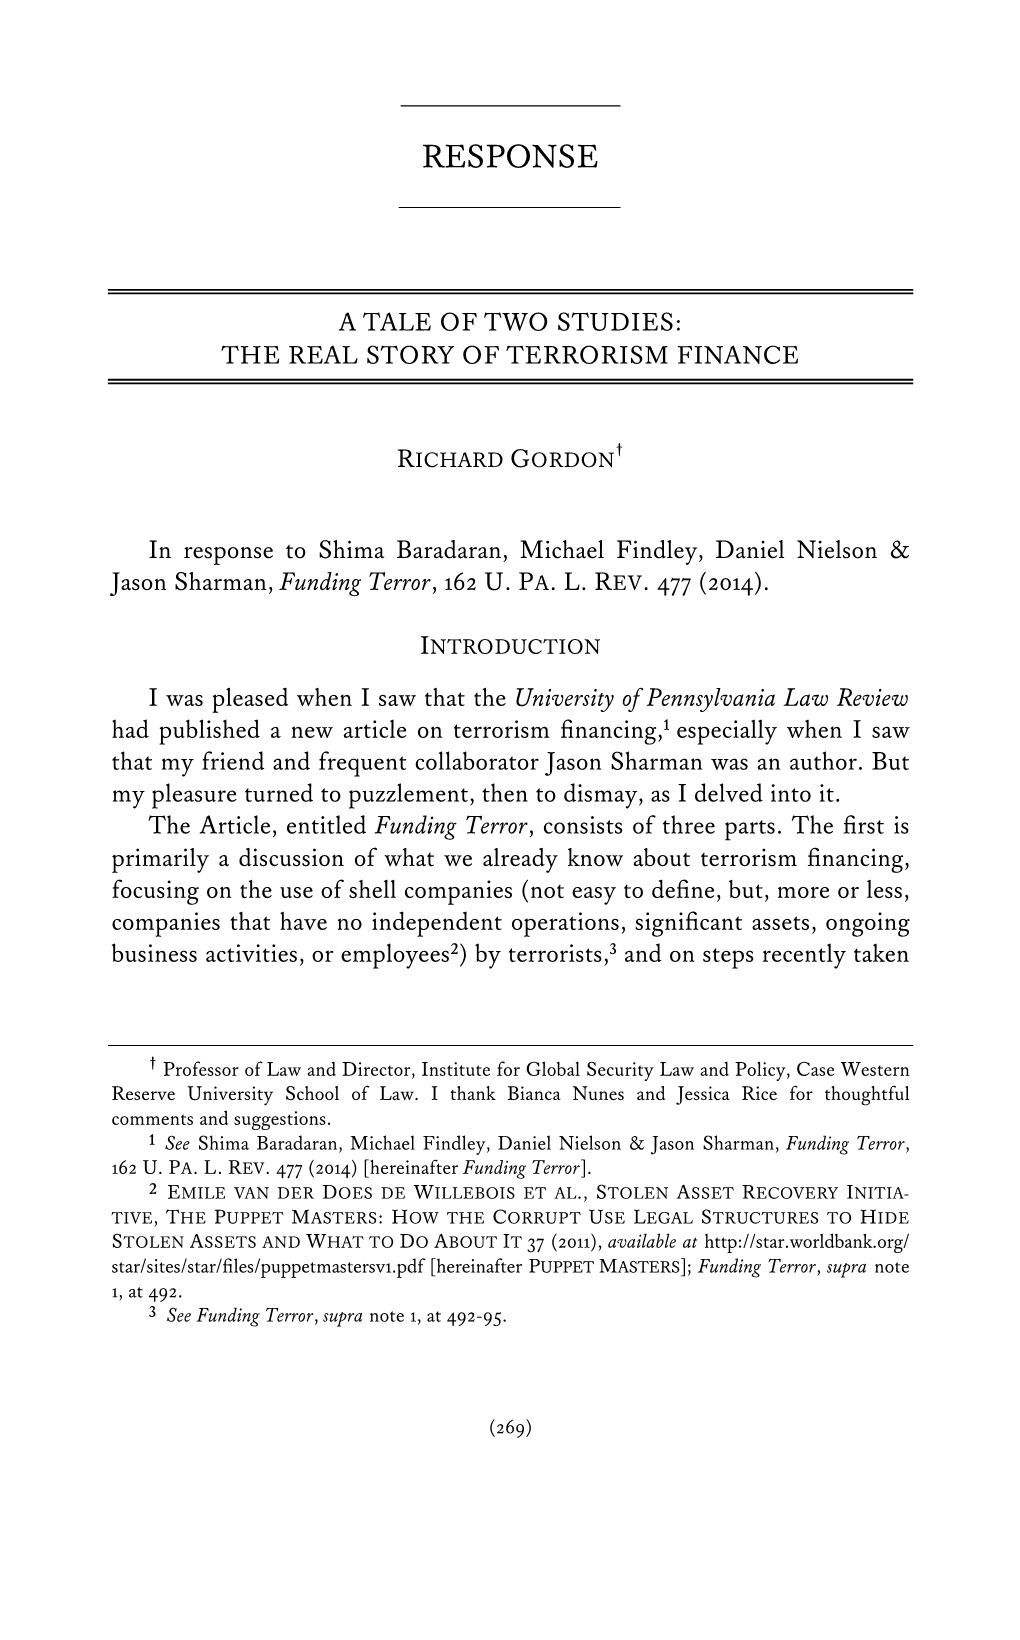 A Tale of Two Studies: the Real Story of Terrorism Finance